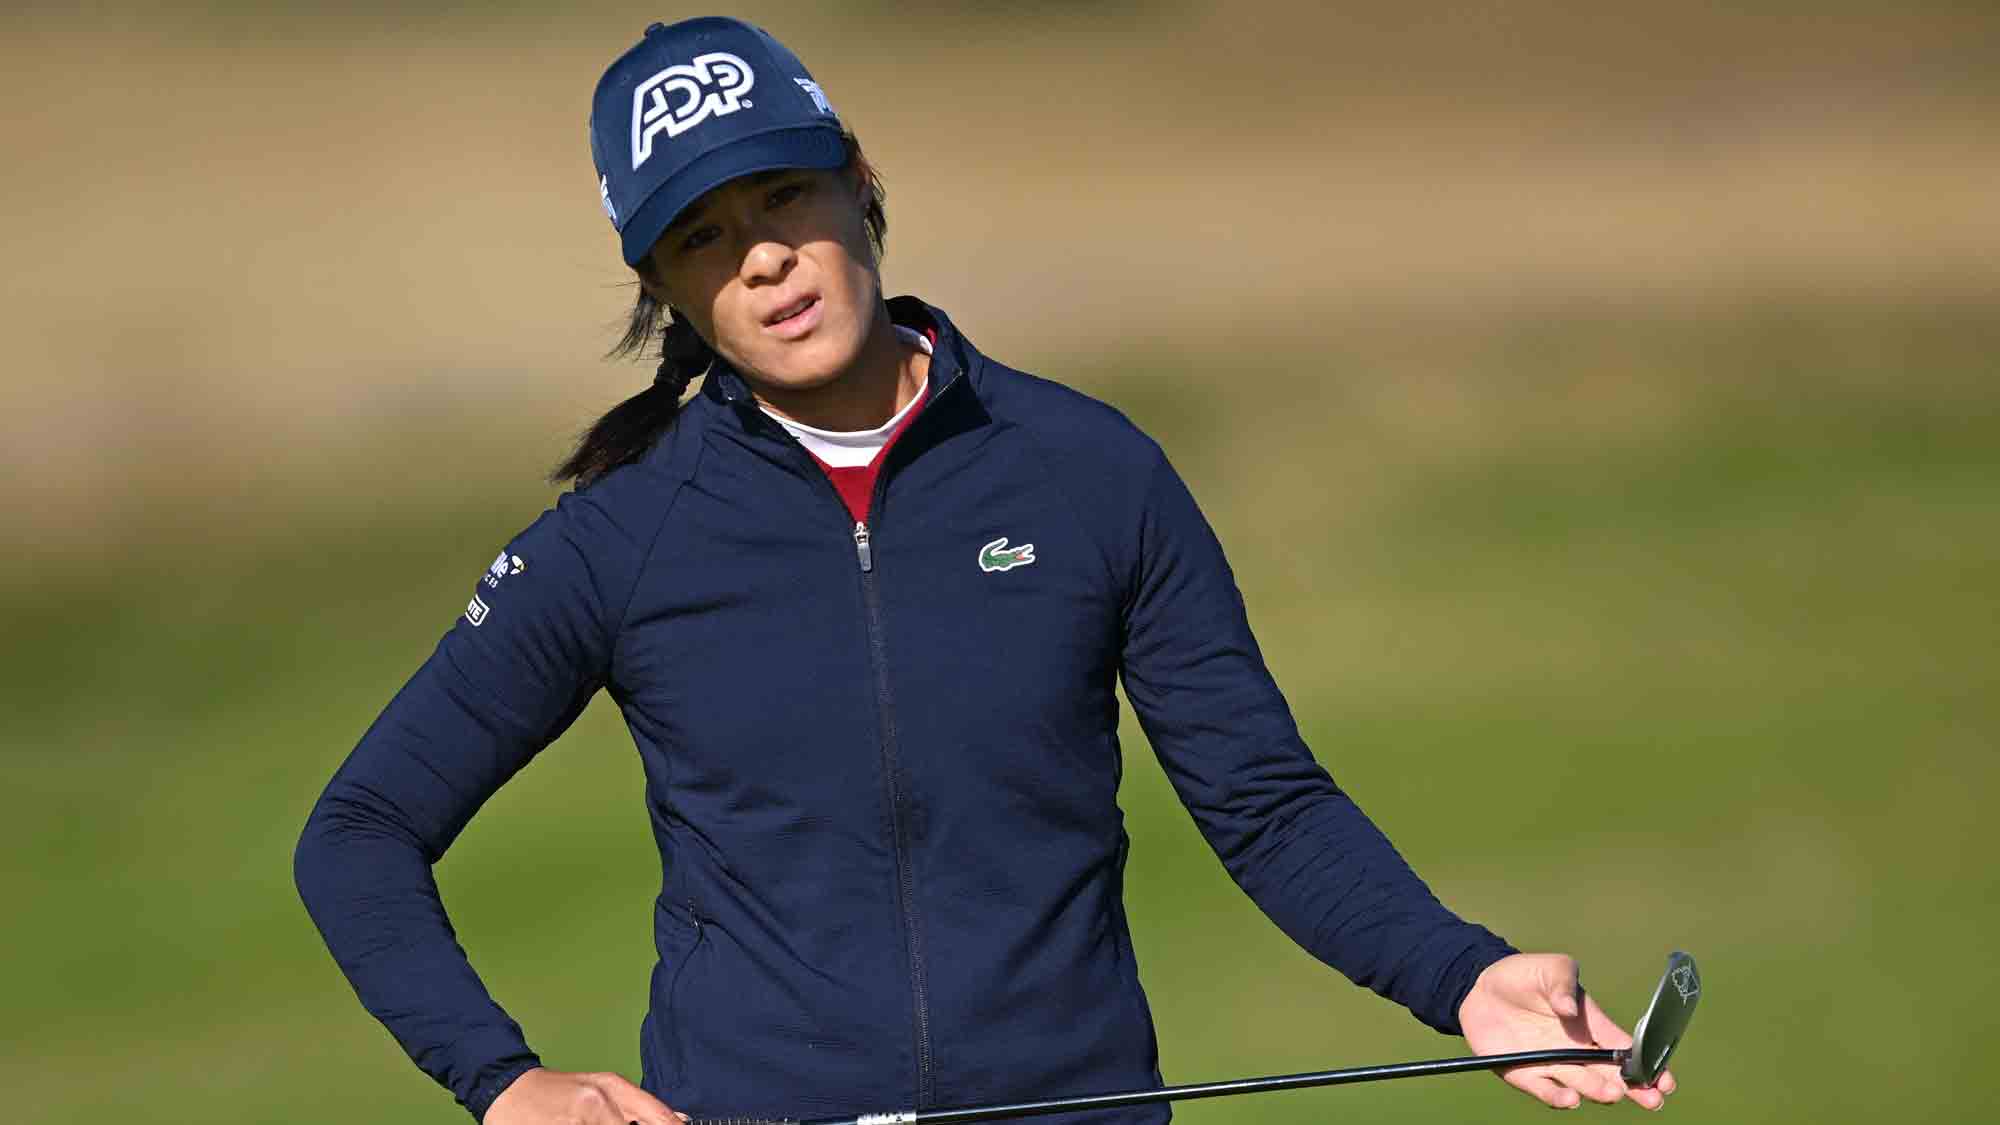 Celine Boutier Back in Contention at FREED GROUP Women’s Scottish Open ...